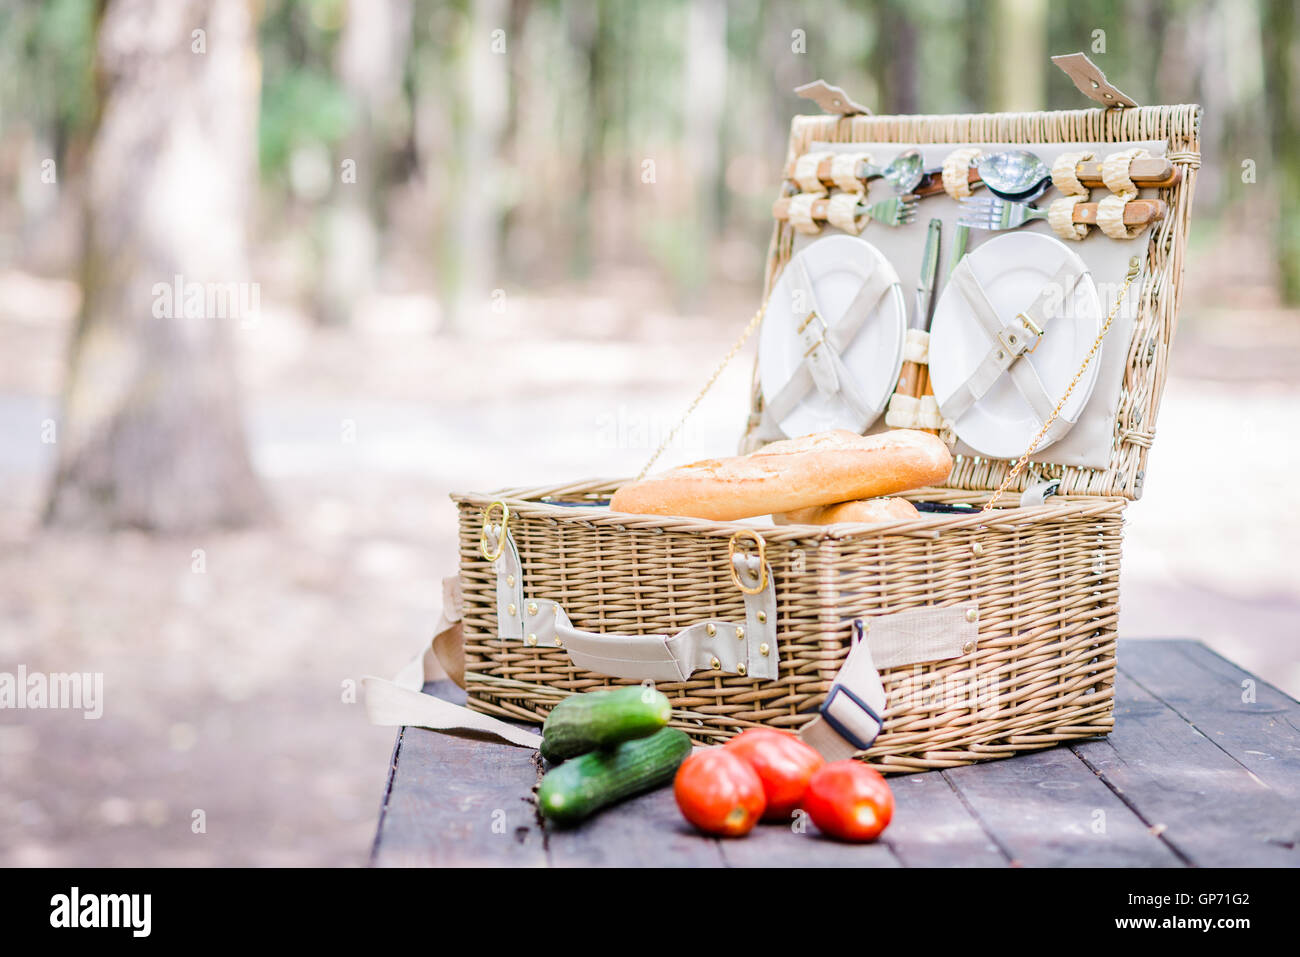 Open picnic basket with tomatoes, cucumbers and bread over a wooden table in the park. Stock Photo